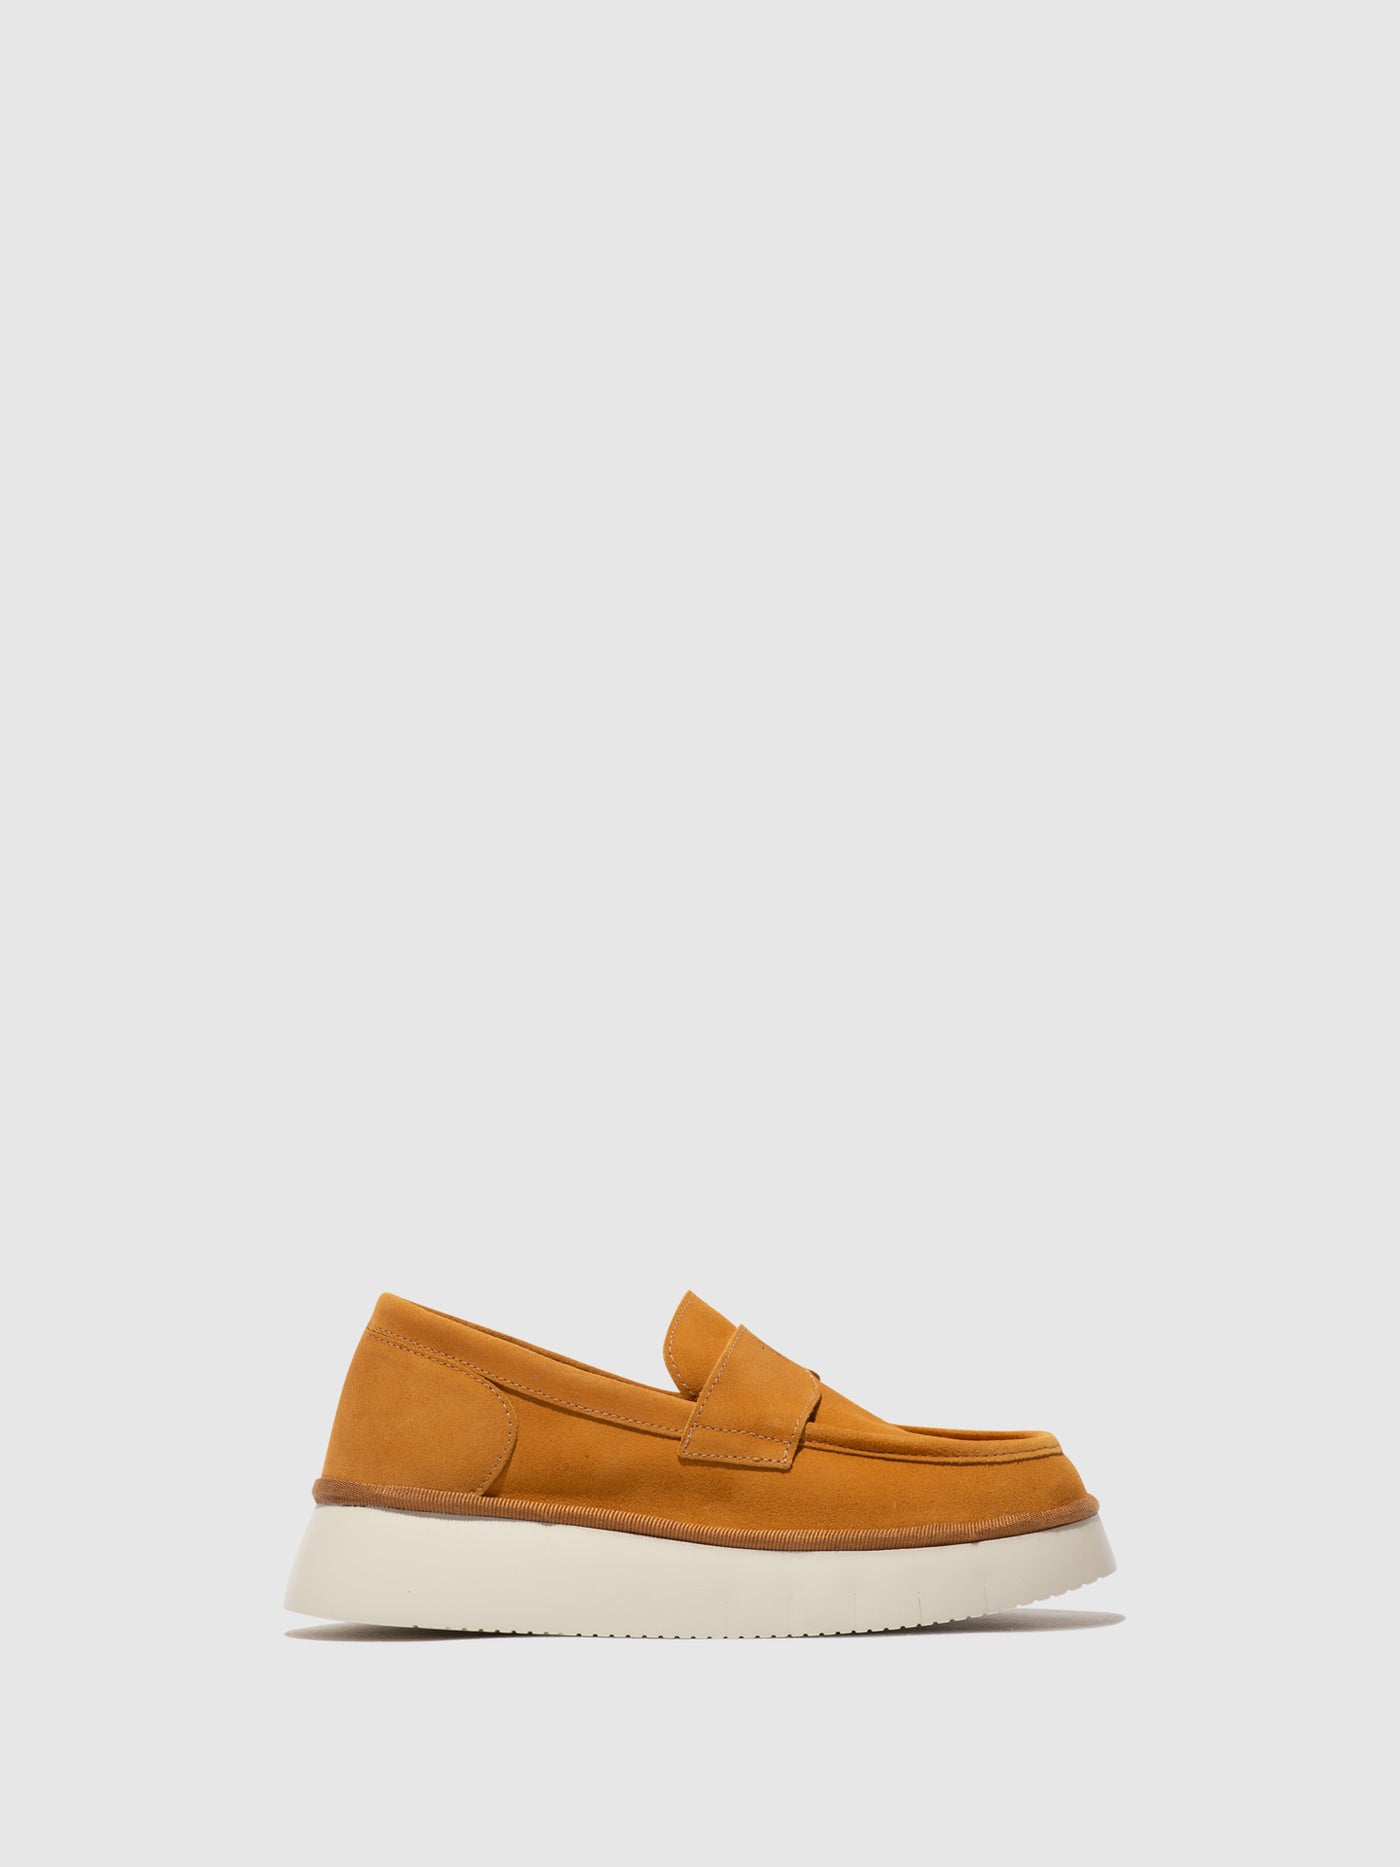 Slip-on Shoes COAF418FLY CORN